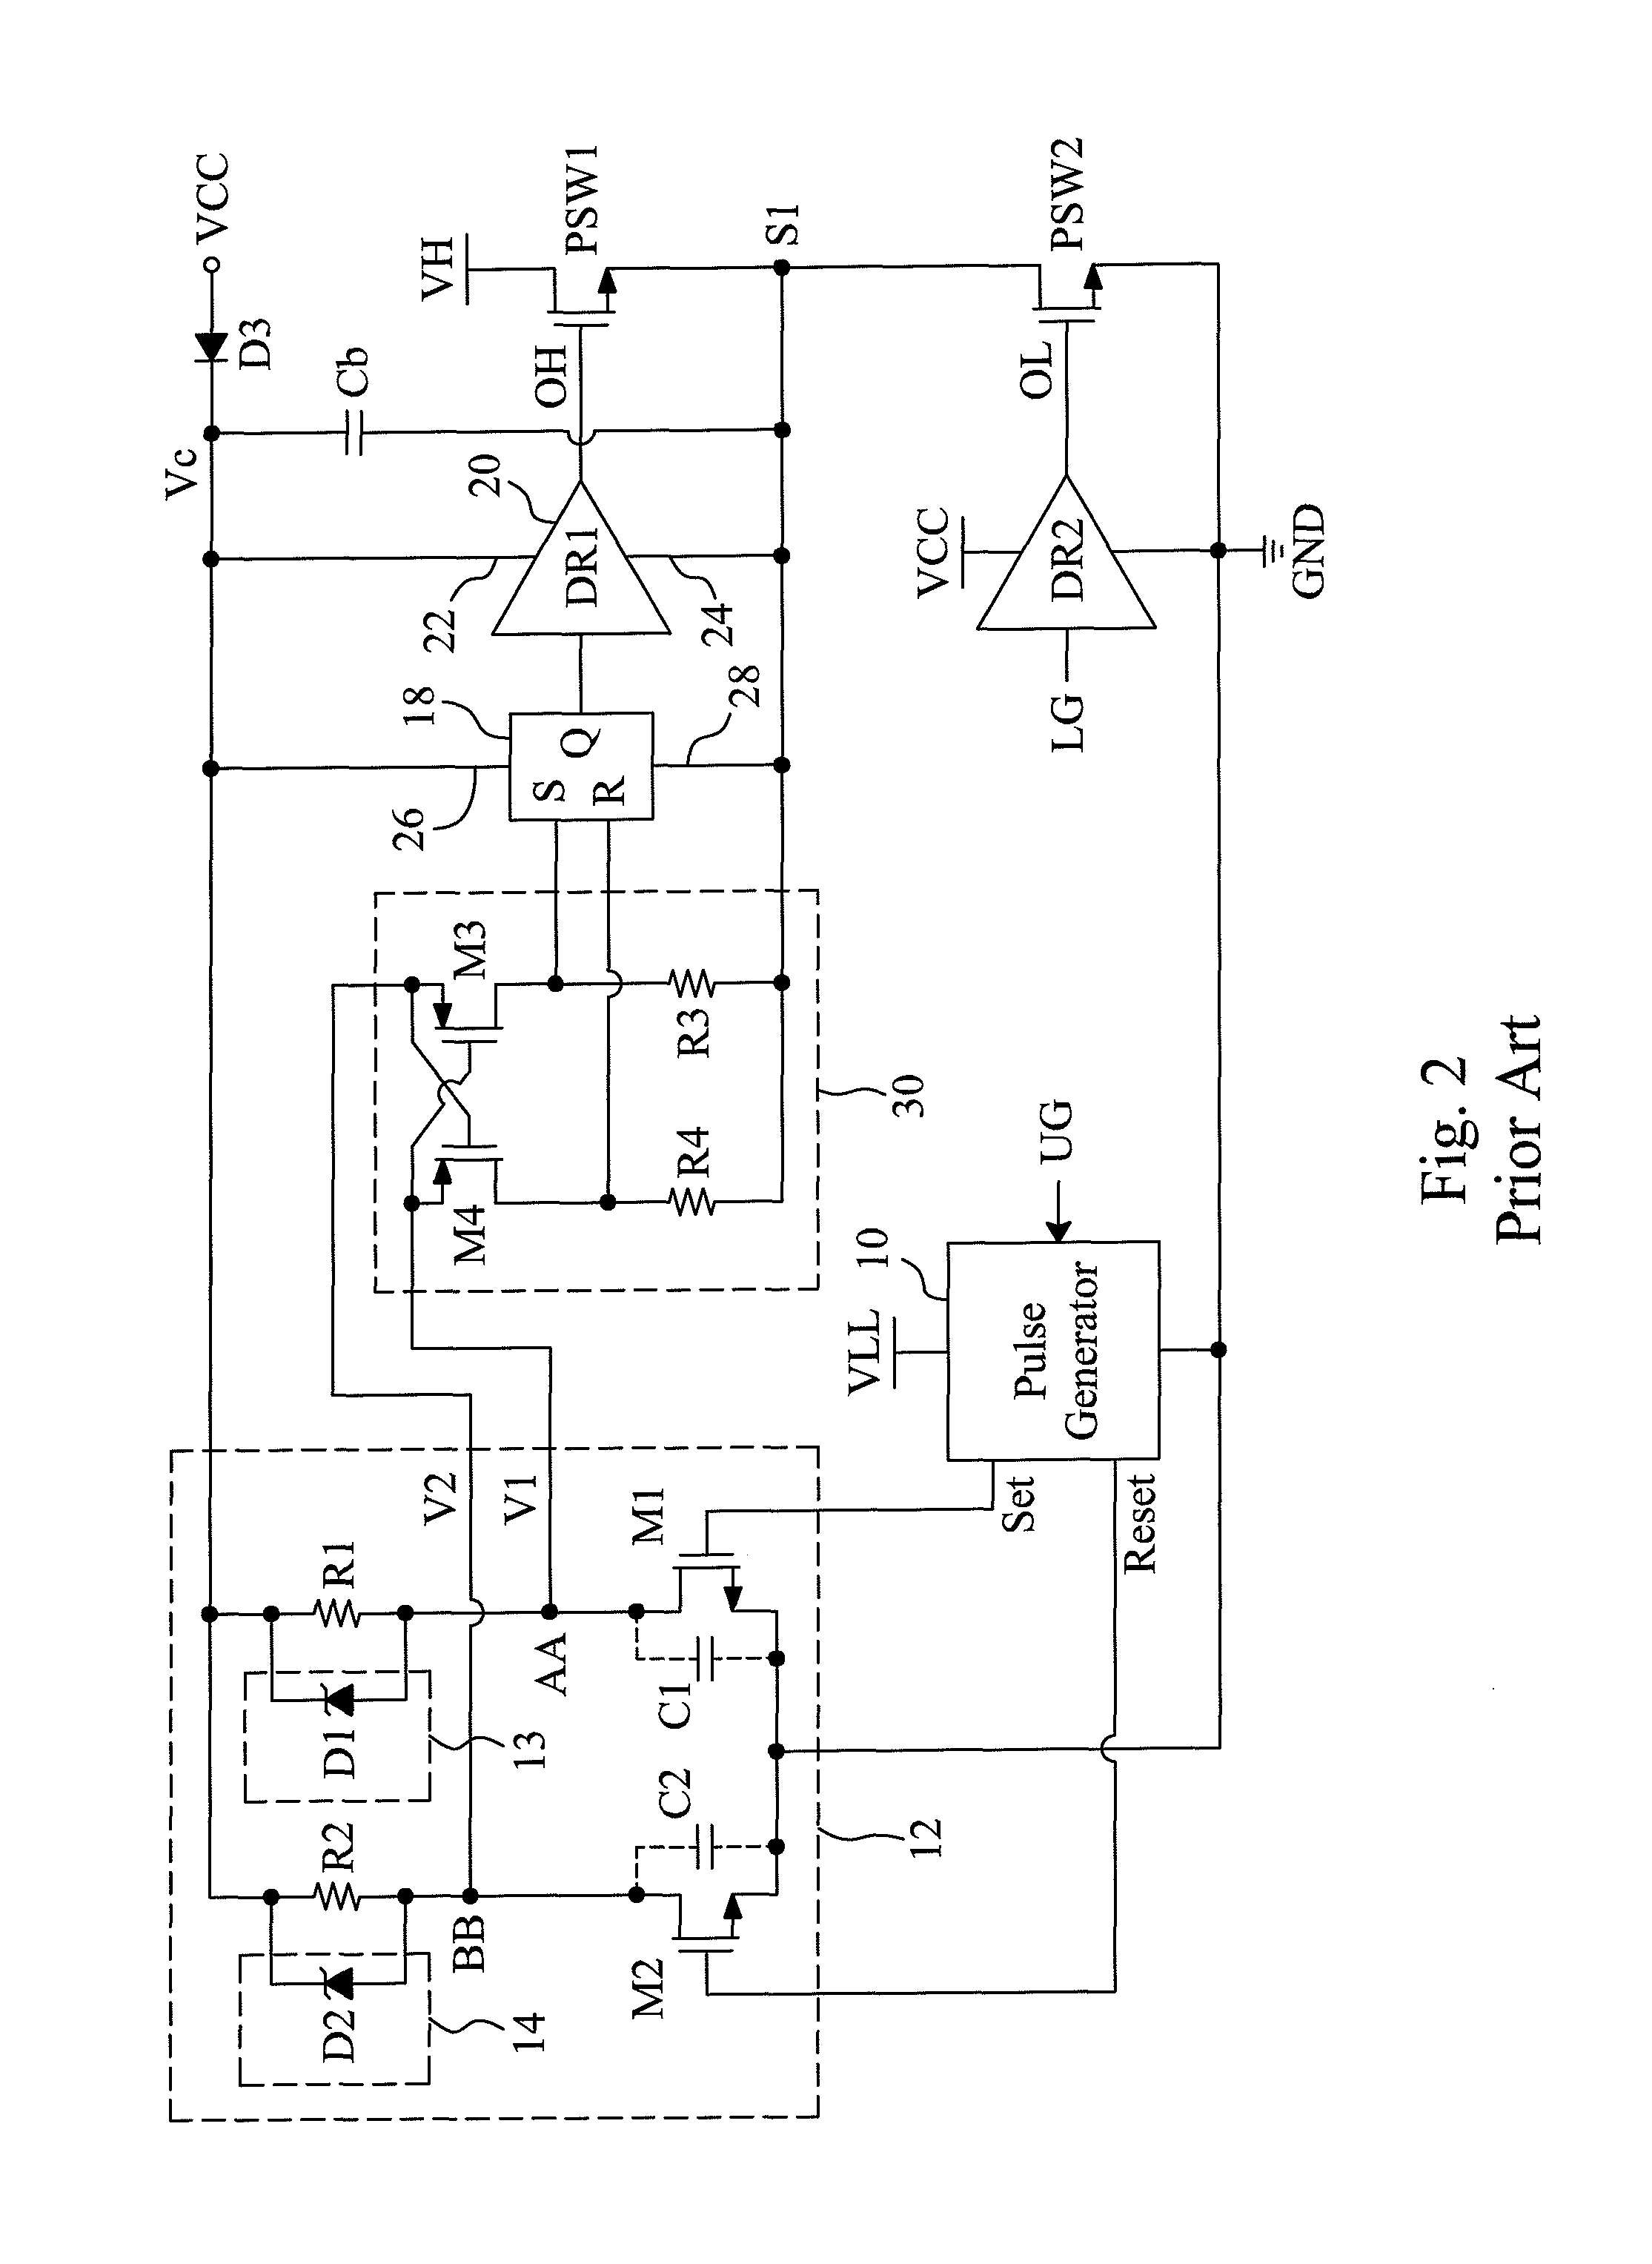 Configuration and method for improving noise immunity of a floating gate driver circuit